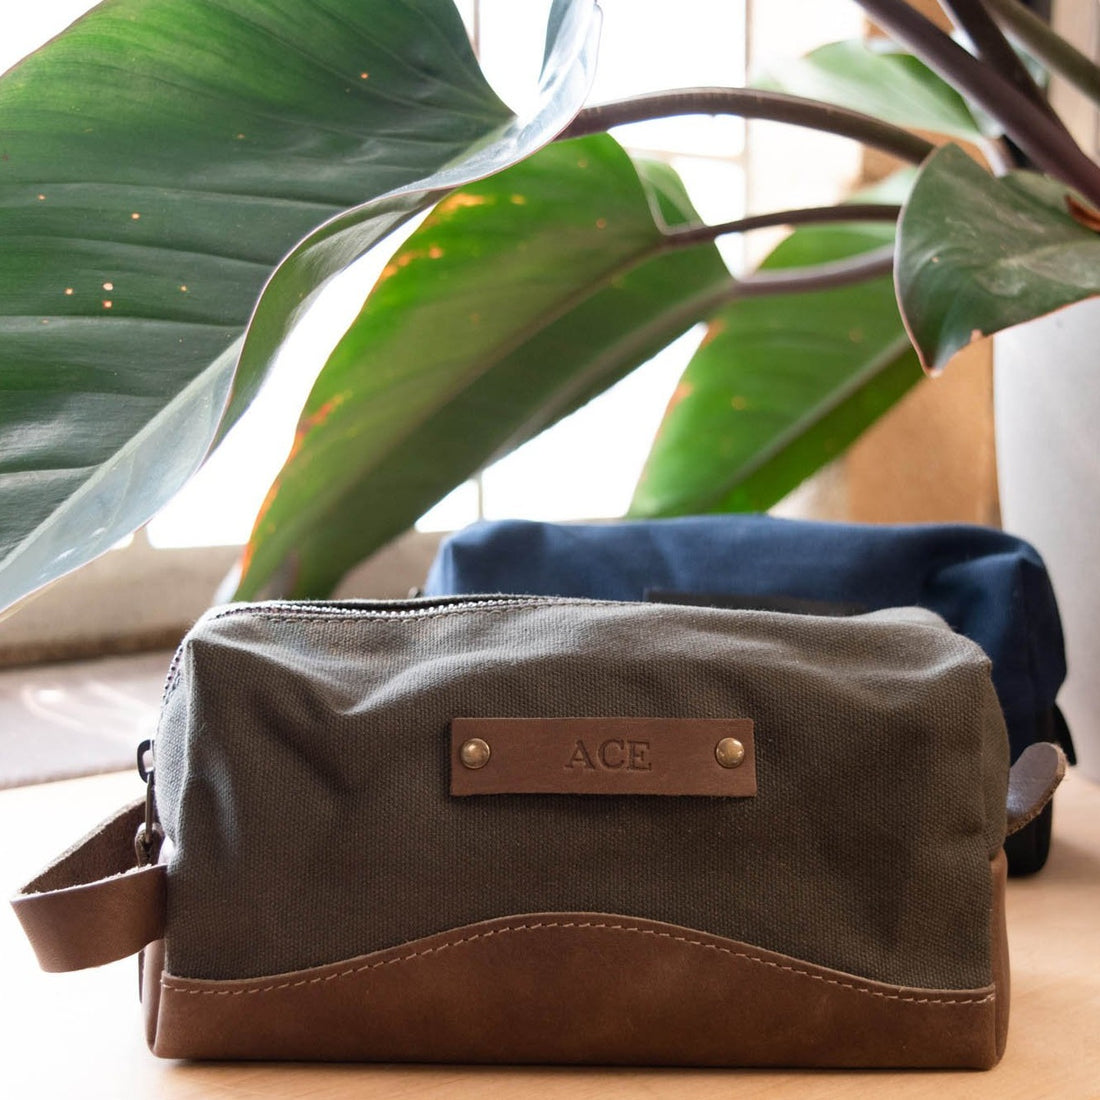 Sustainable Dopp Kits & Toiletry Bags for Men